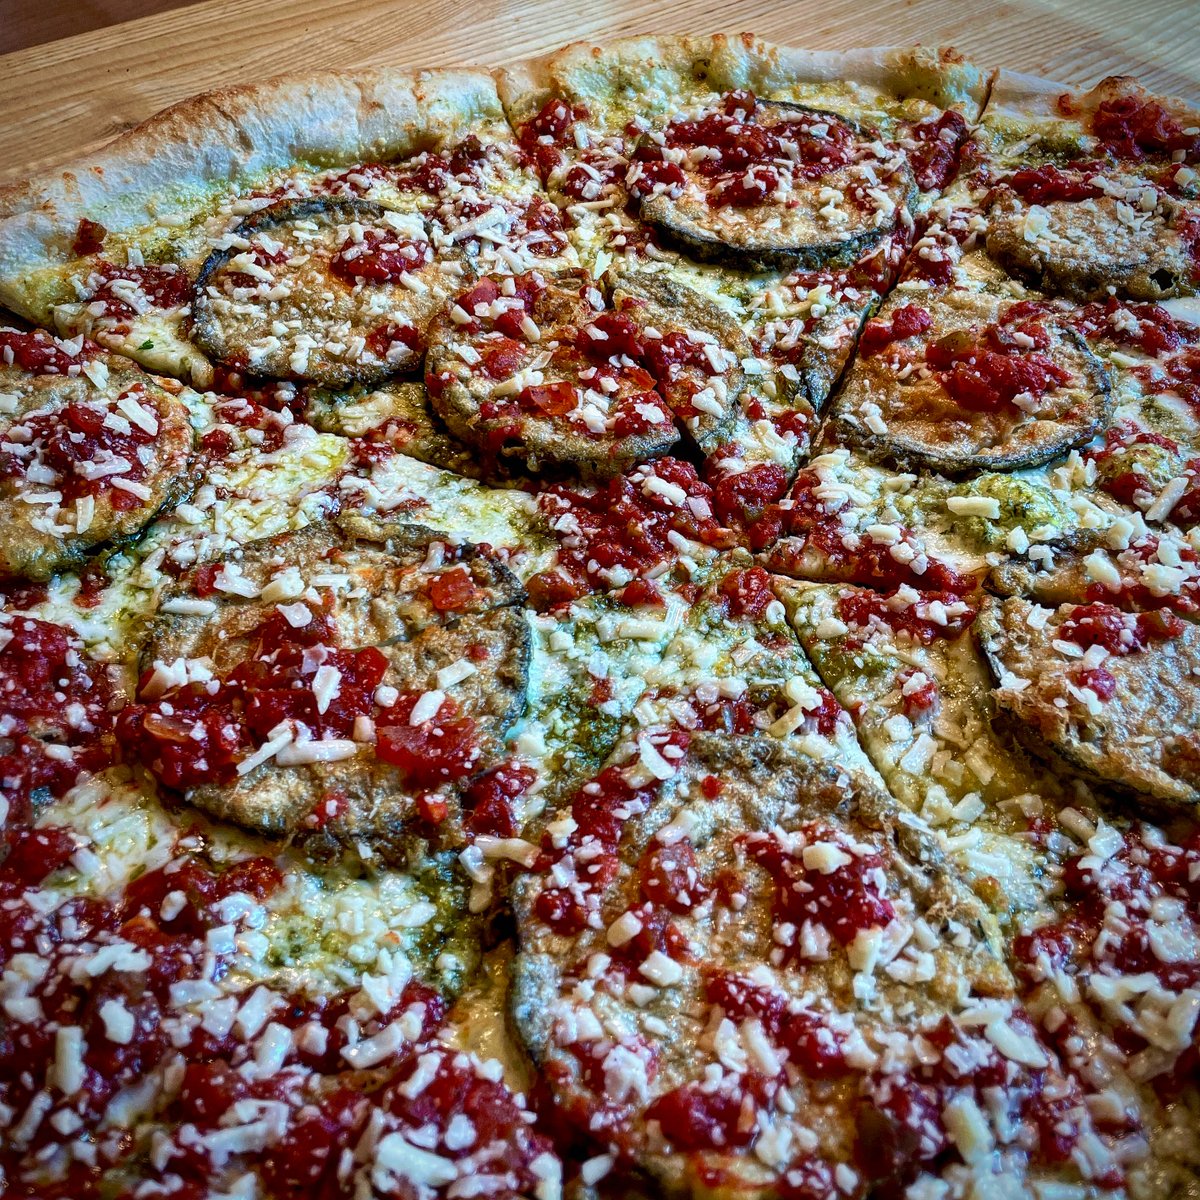 It’s a new Summer veggie slice for our weekly featured special! 🍆 ☀️ Eggplant Pesto features local eggplant, pesto, green pepper marinara, mozzarella, pecorino, and asiago! Now available through September 12th!